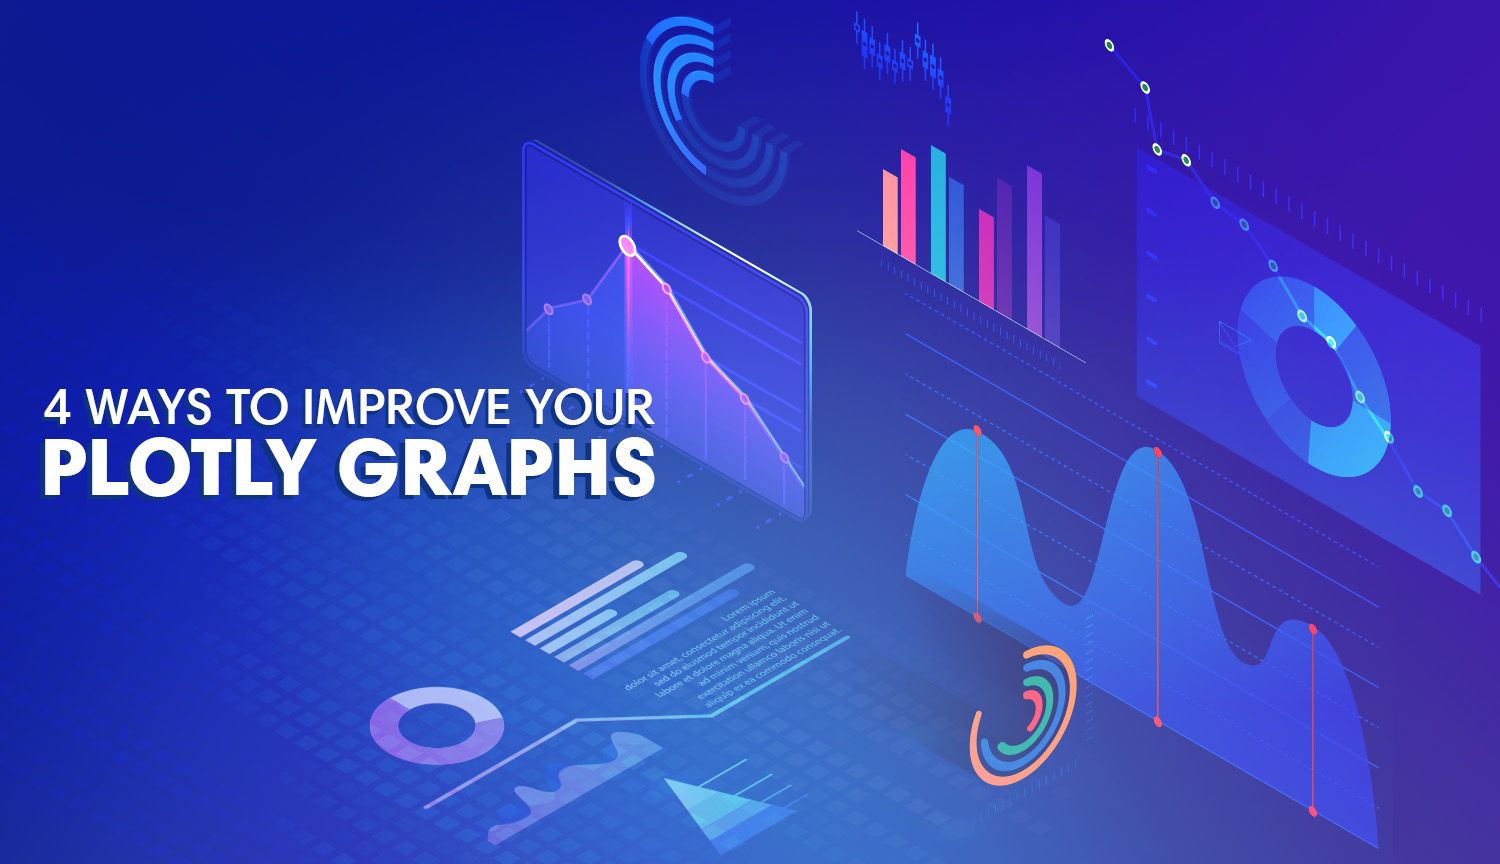 4 Ways To Improve Your Plotly Graphs